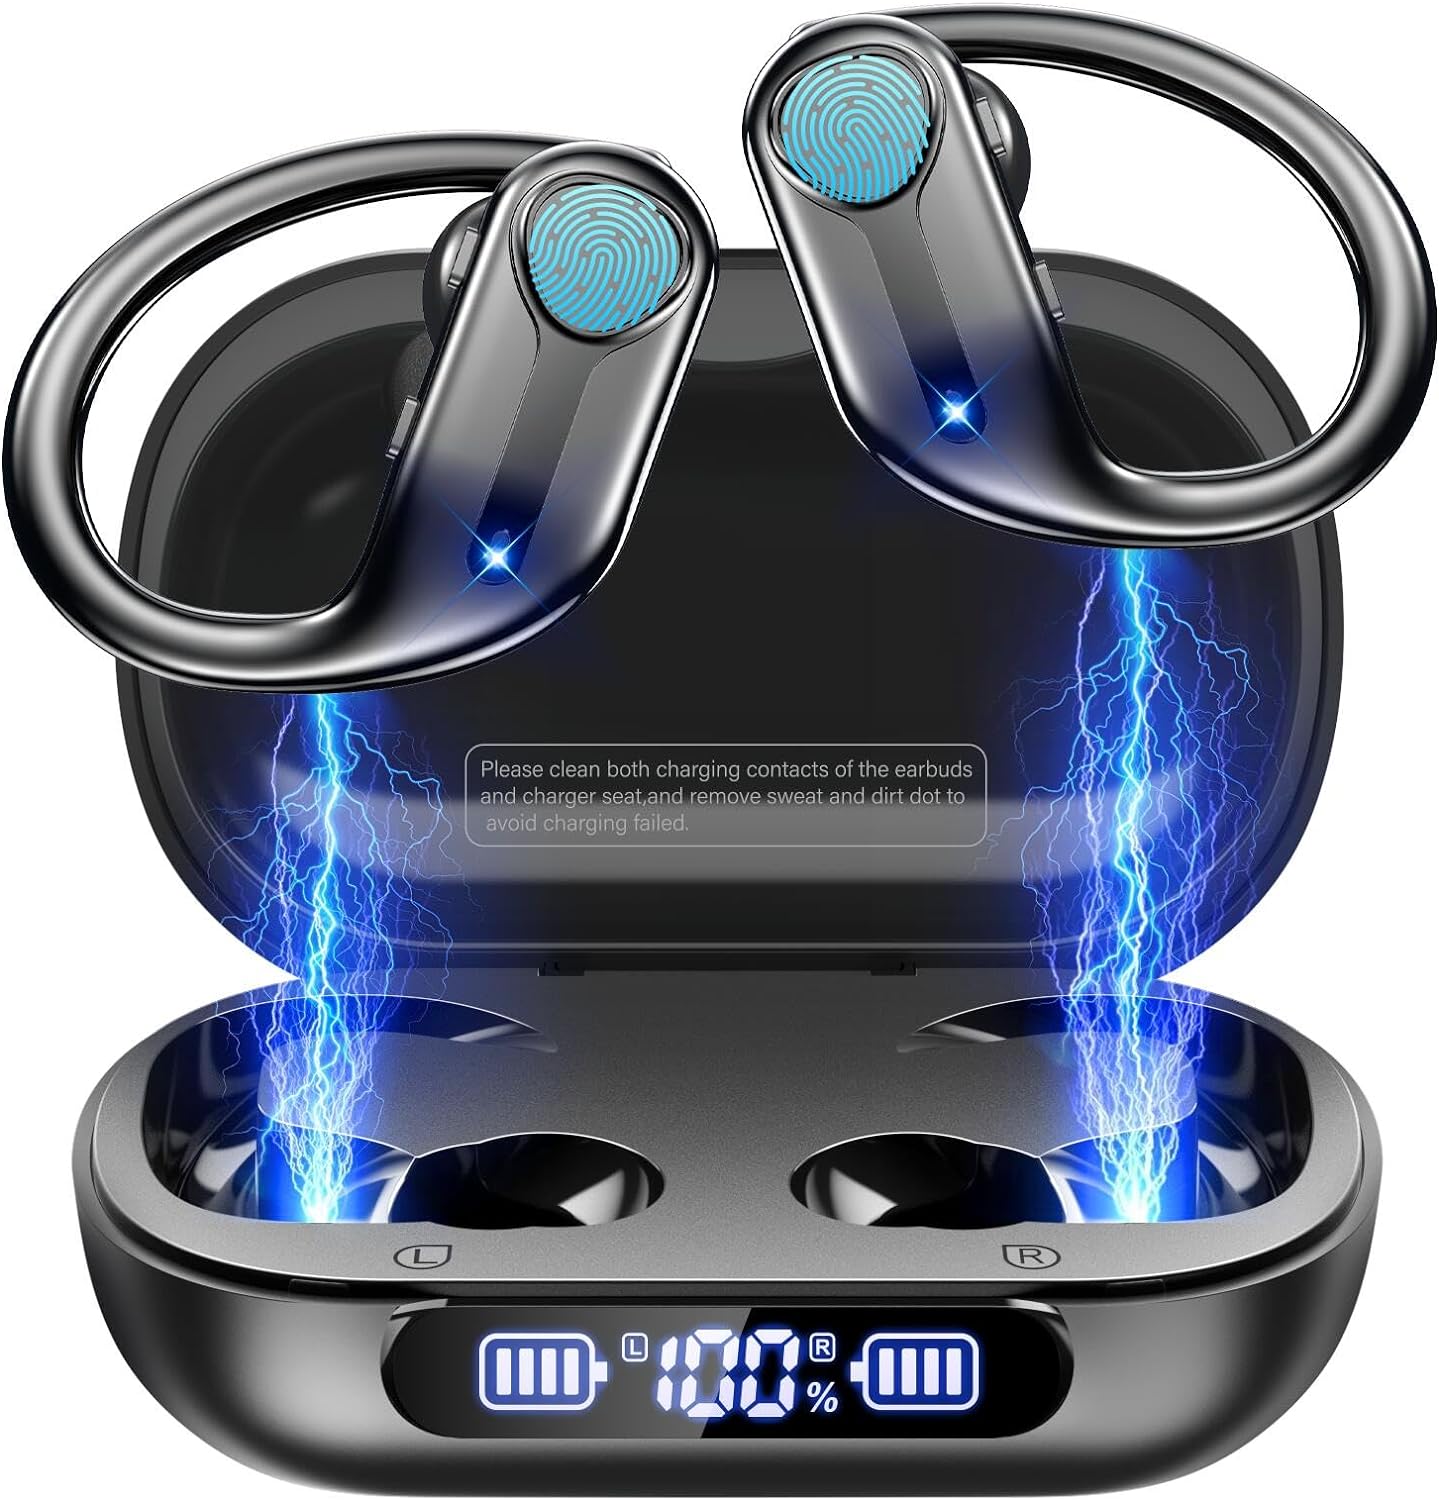 Limited-Time Offer: Score 85% off Pollway Wireless Earbuds with 88H Playtime - Black